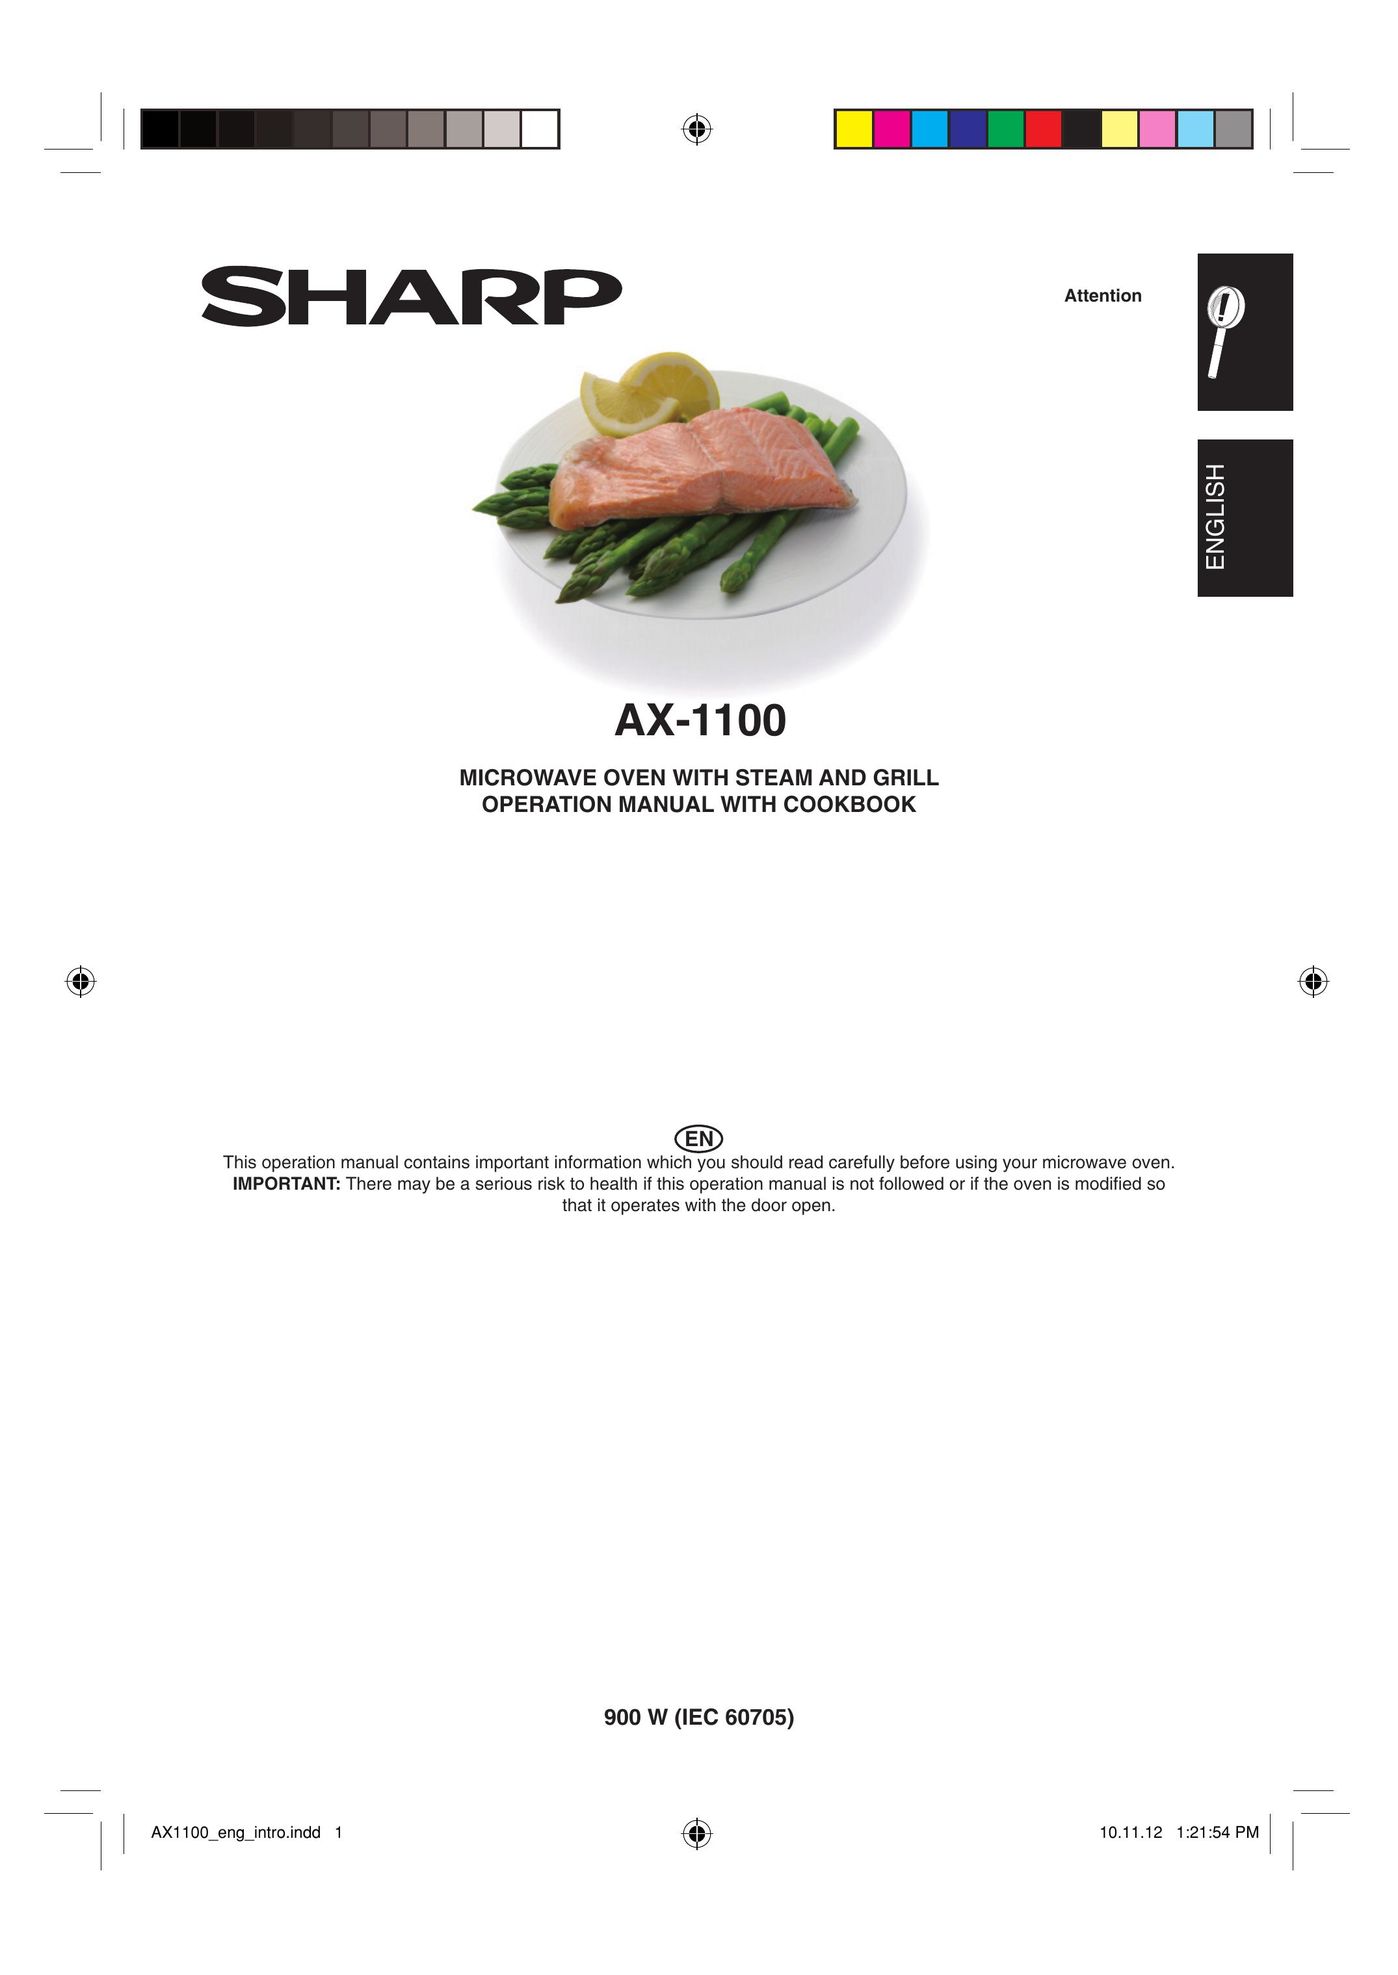 Sharp AX-1100 Microwave Oven User Manual